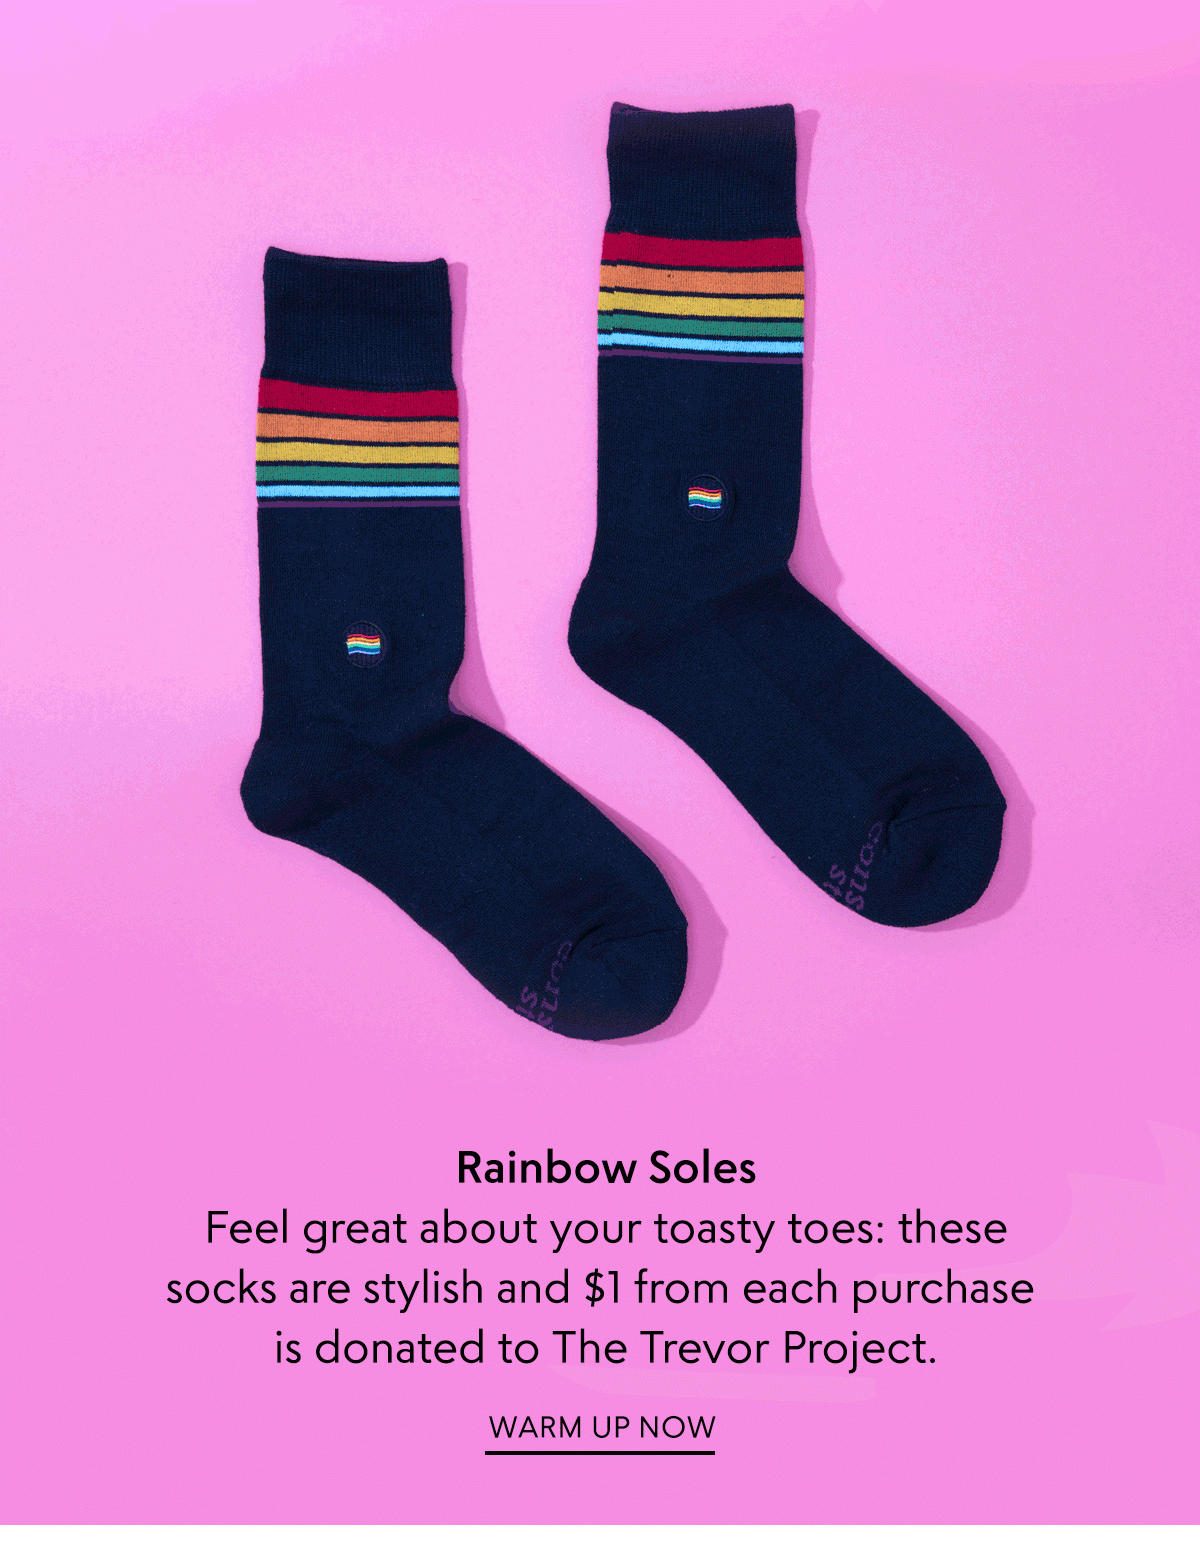 The LGBTQ Trevor Project Socks: these socks are stylish and $1 from each purchase is donated to The Trevor Project.